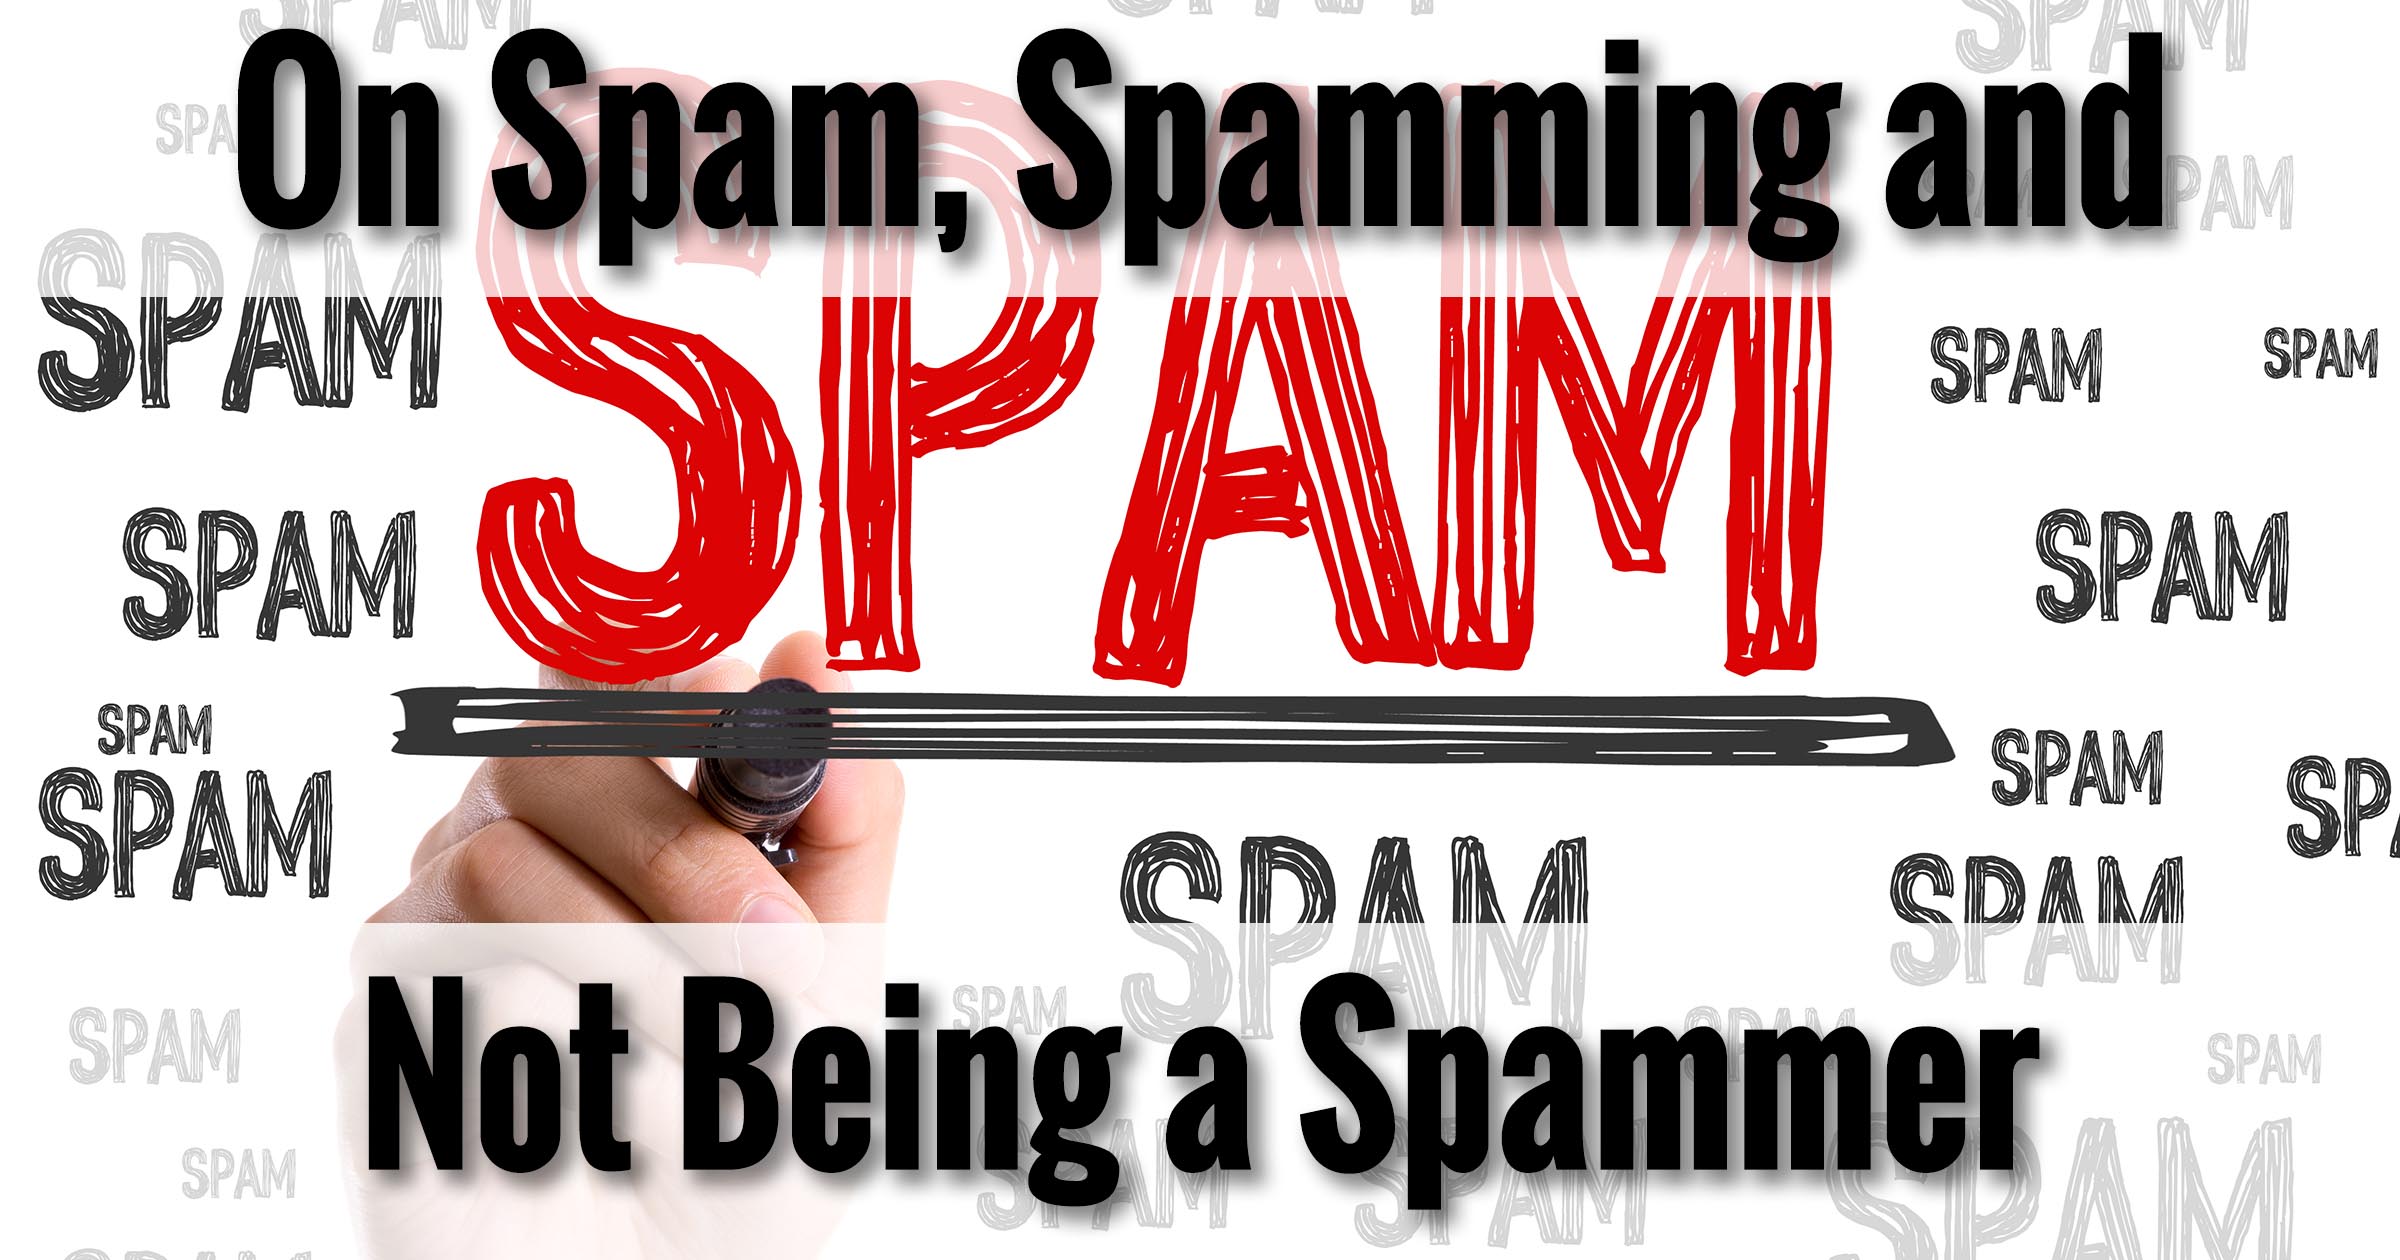 On Spam, Spamming, and Not Being a Spammer